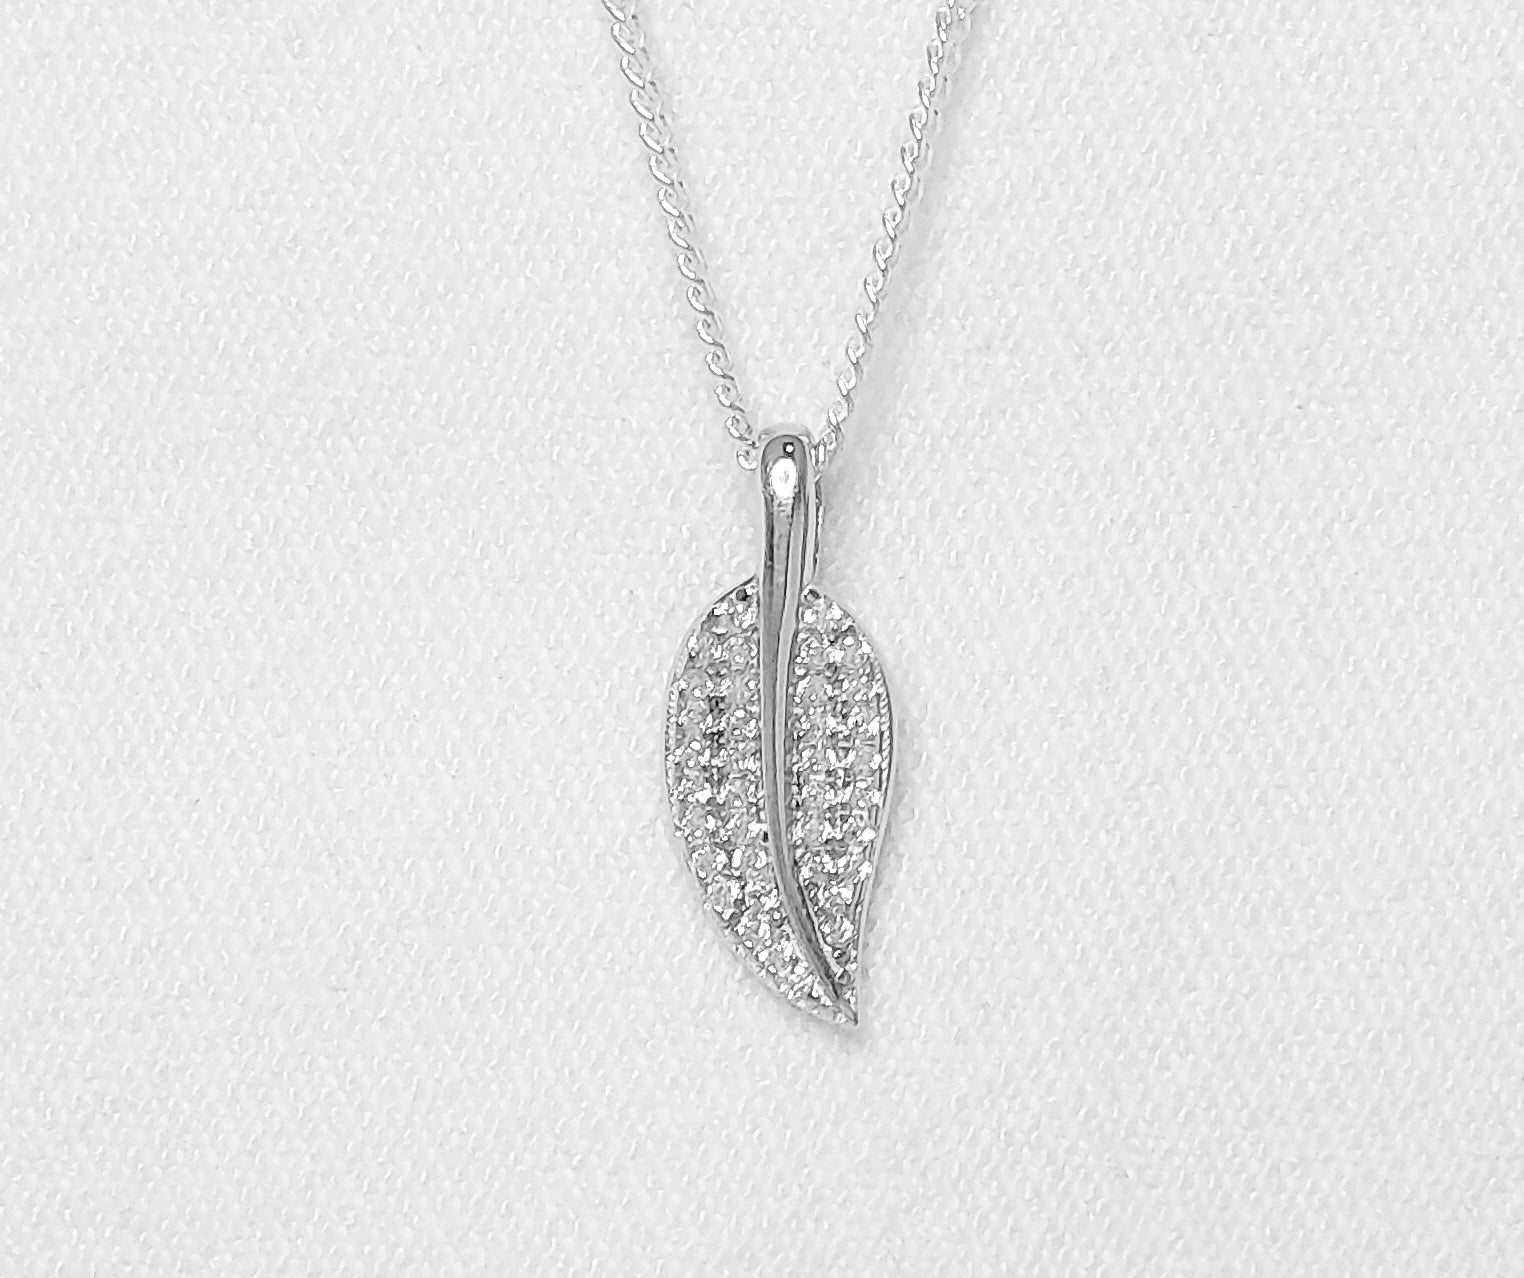 Sterling Silver Leaf Pendant with Cubic Zirconia Stones